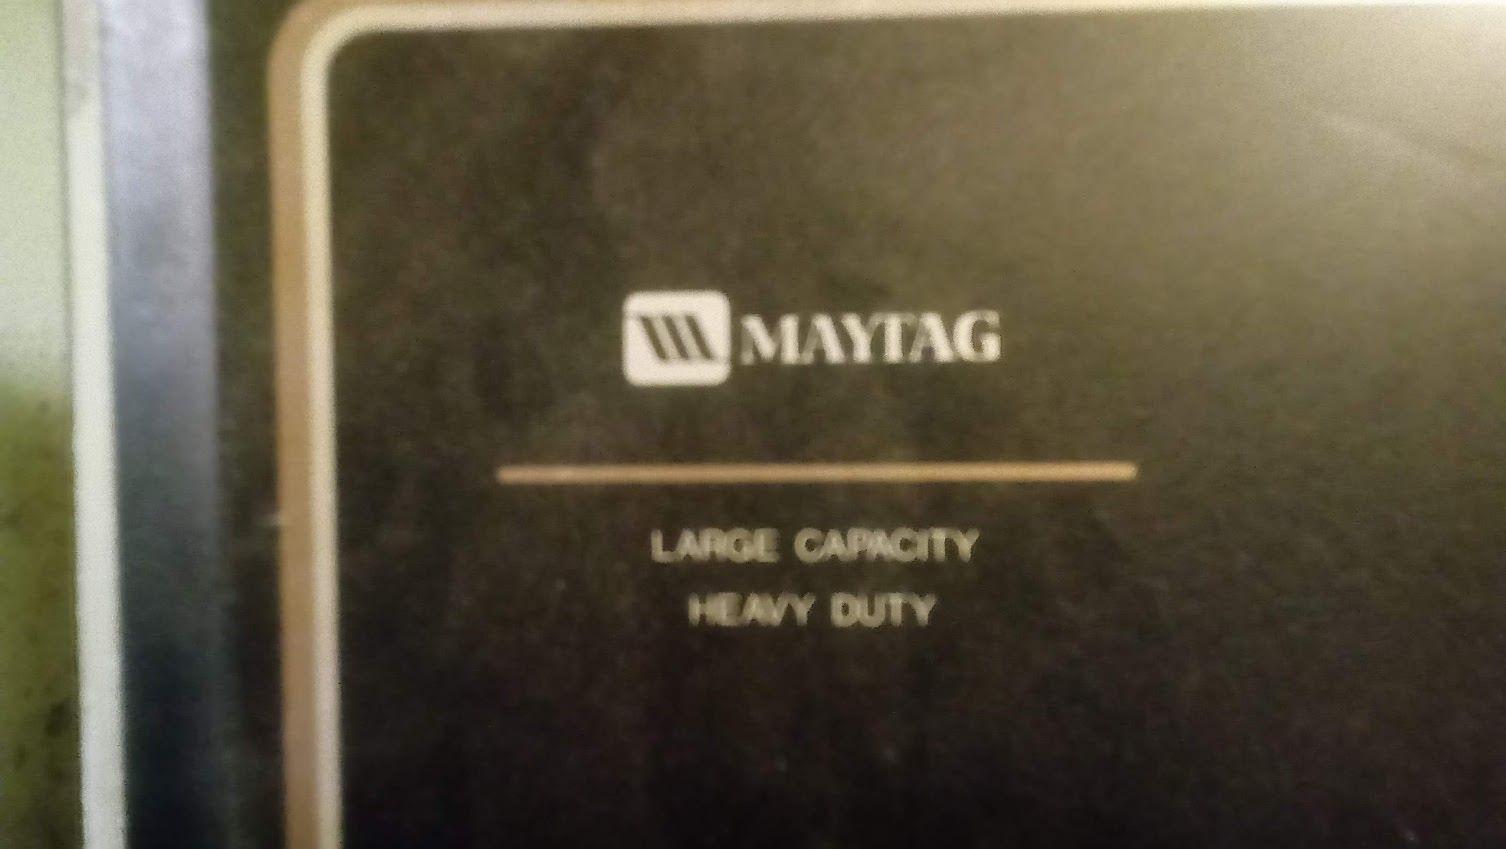 Old Maytag Logo - Paging Napolean: Old Maytag Washer Problem | TigerDroppings.com